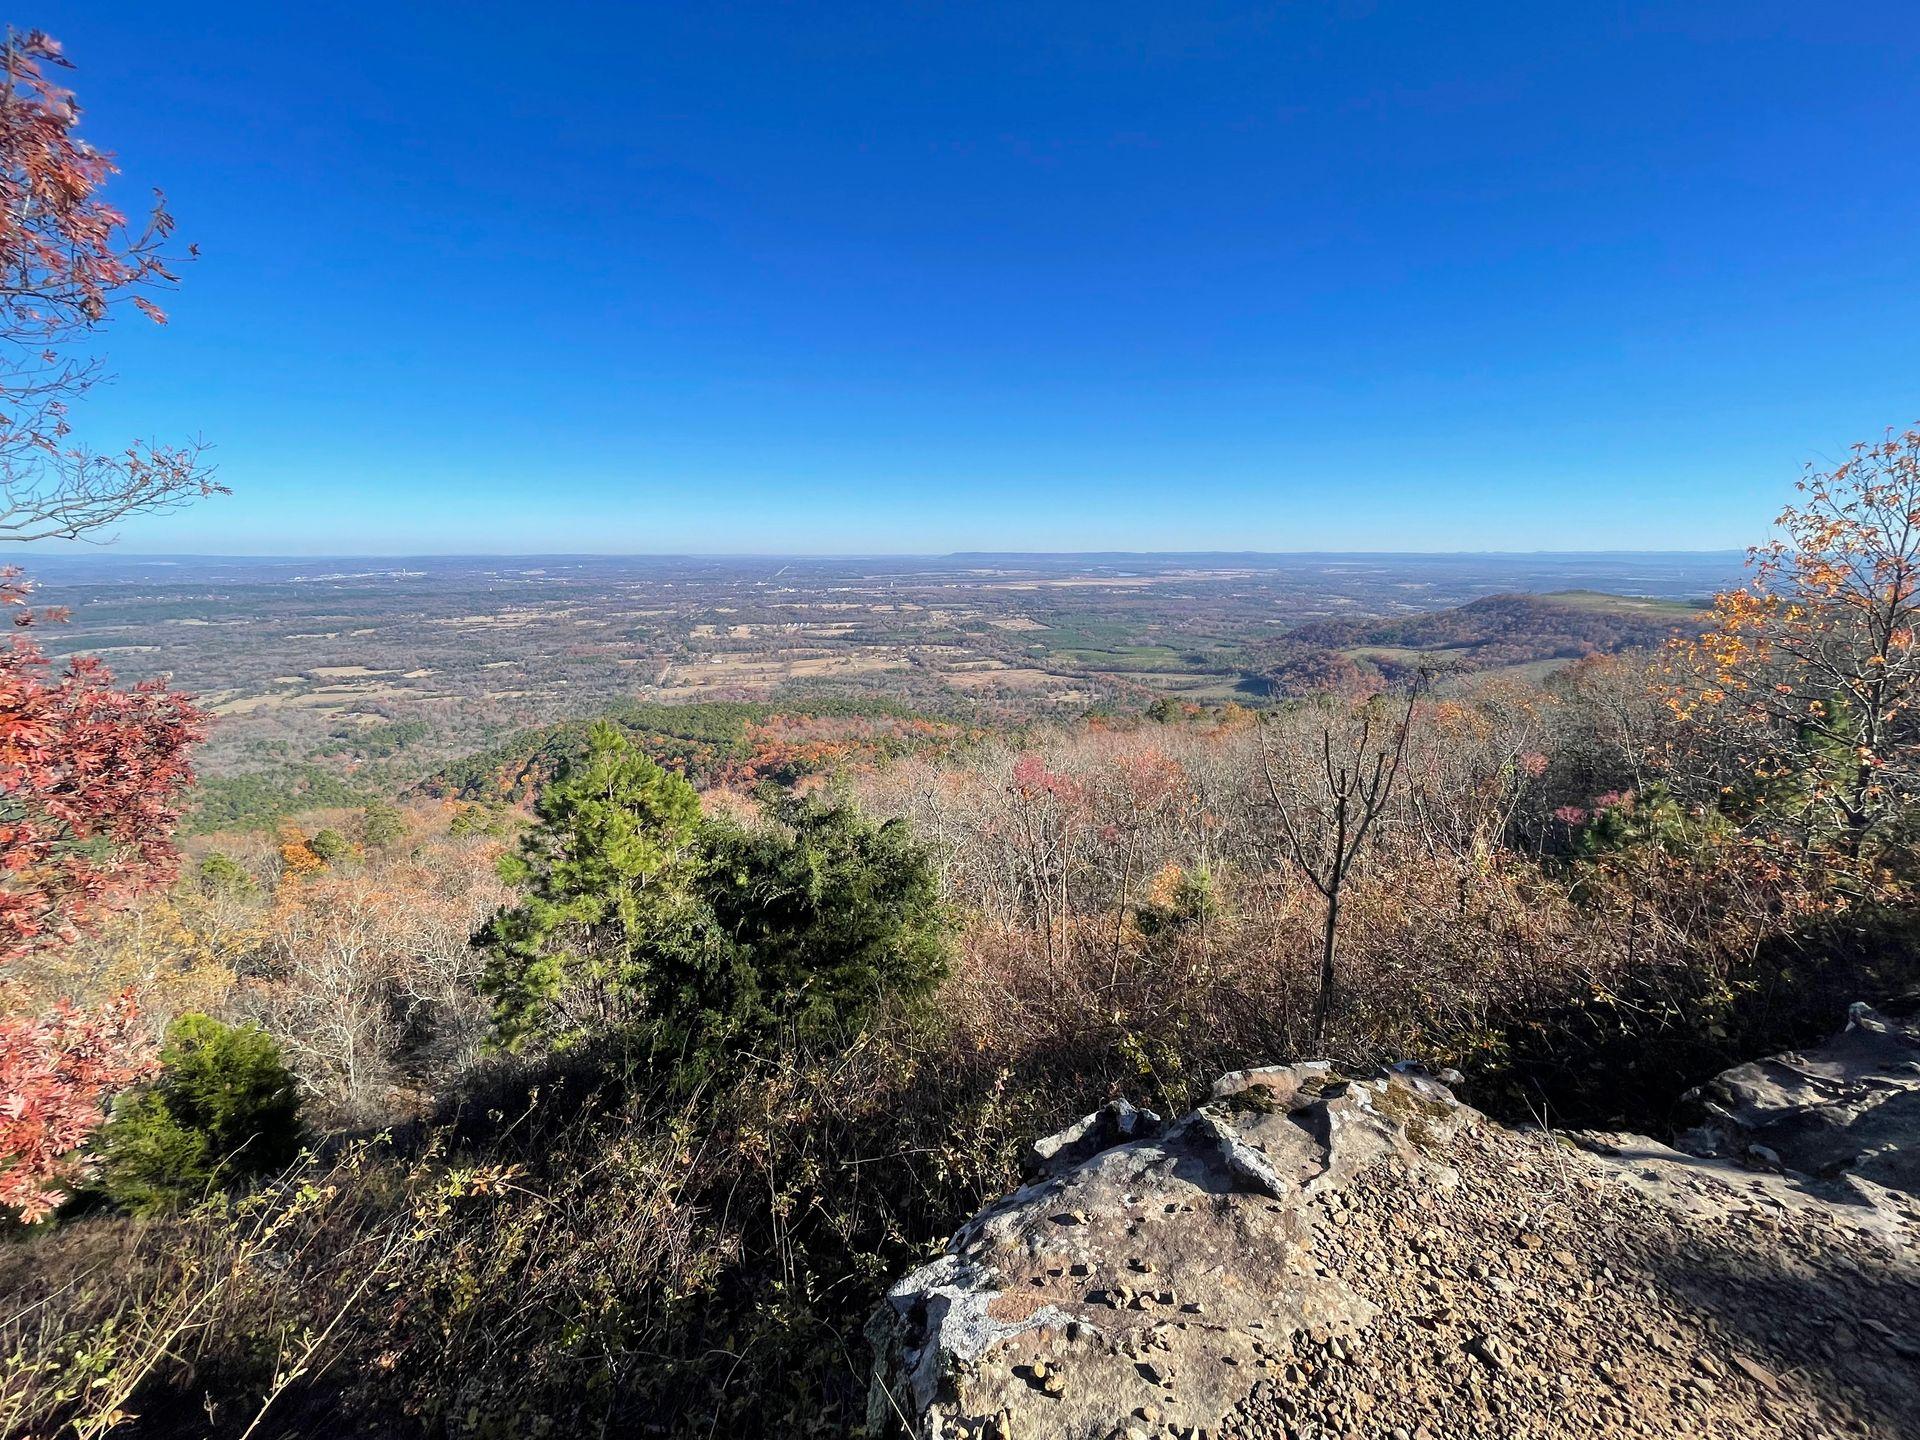 Looking down at a valley from Rim trail in Mount Nebo State Park. There are bits of colorful fall foliage mixed throughout the landscape.